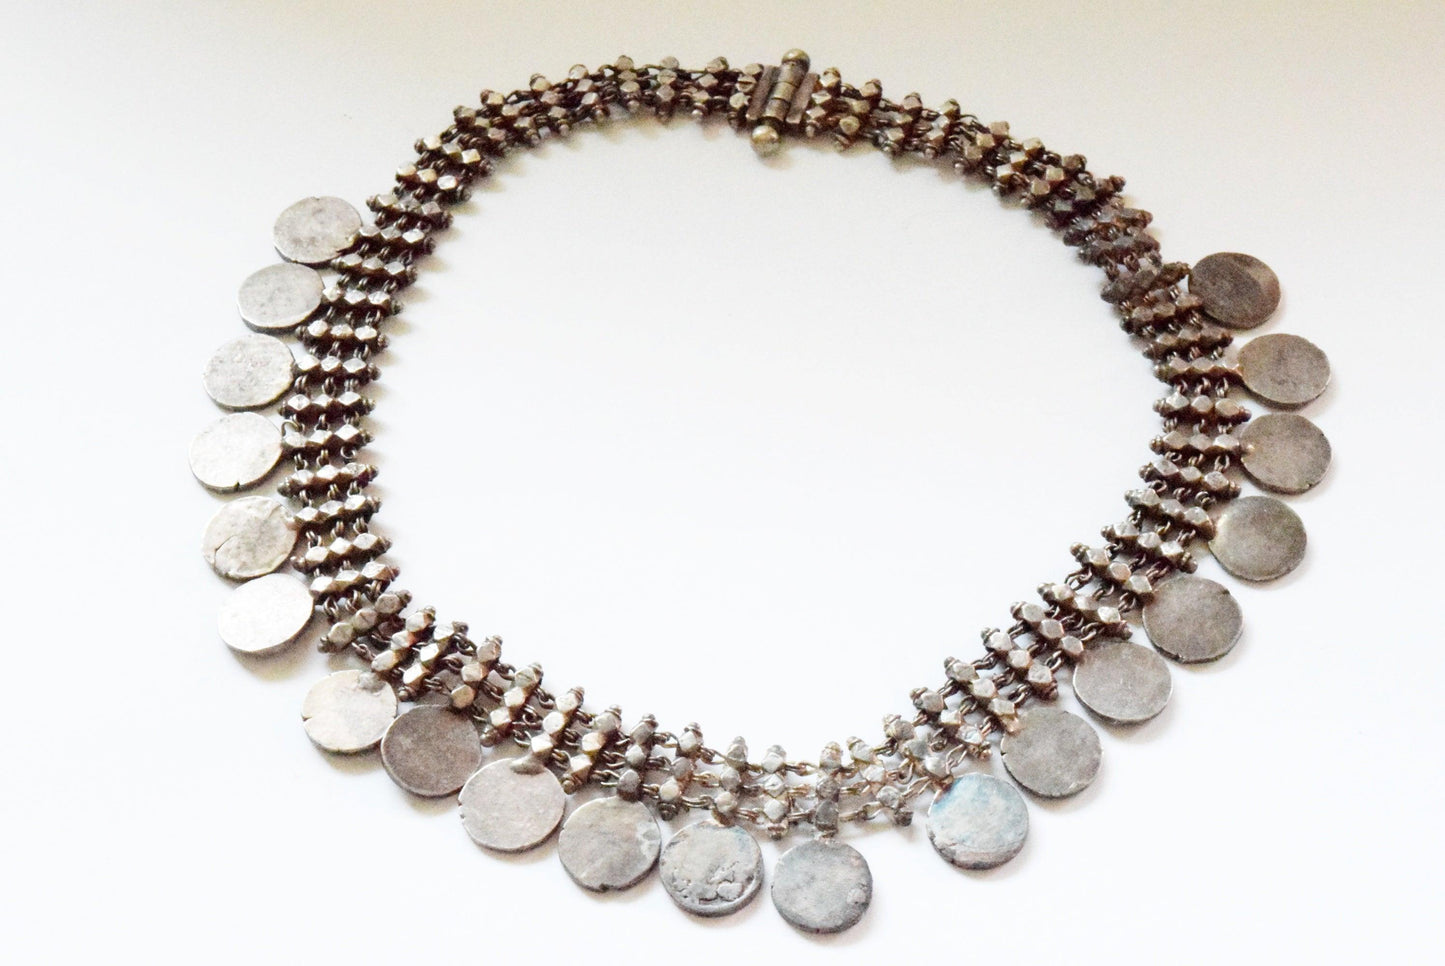 Old Silver Coin Indian Choker Necklace - Anteeka